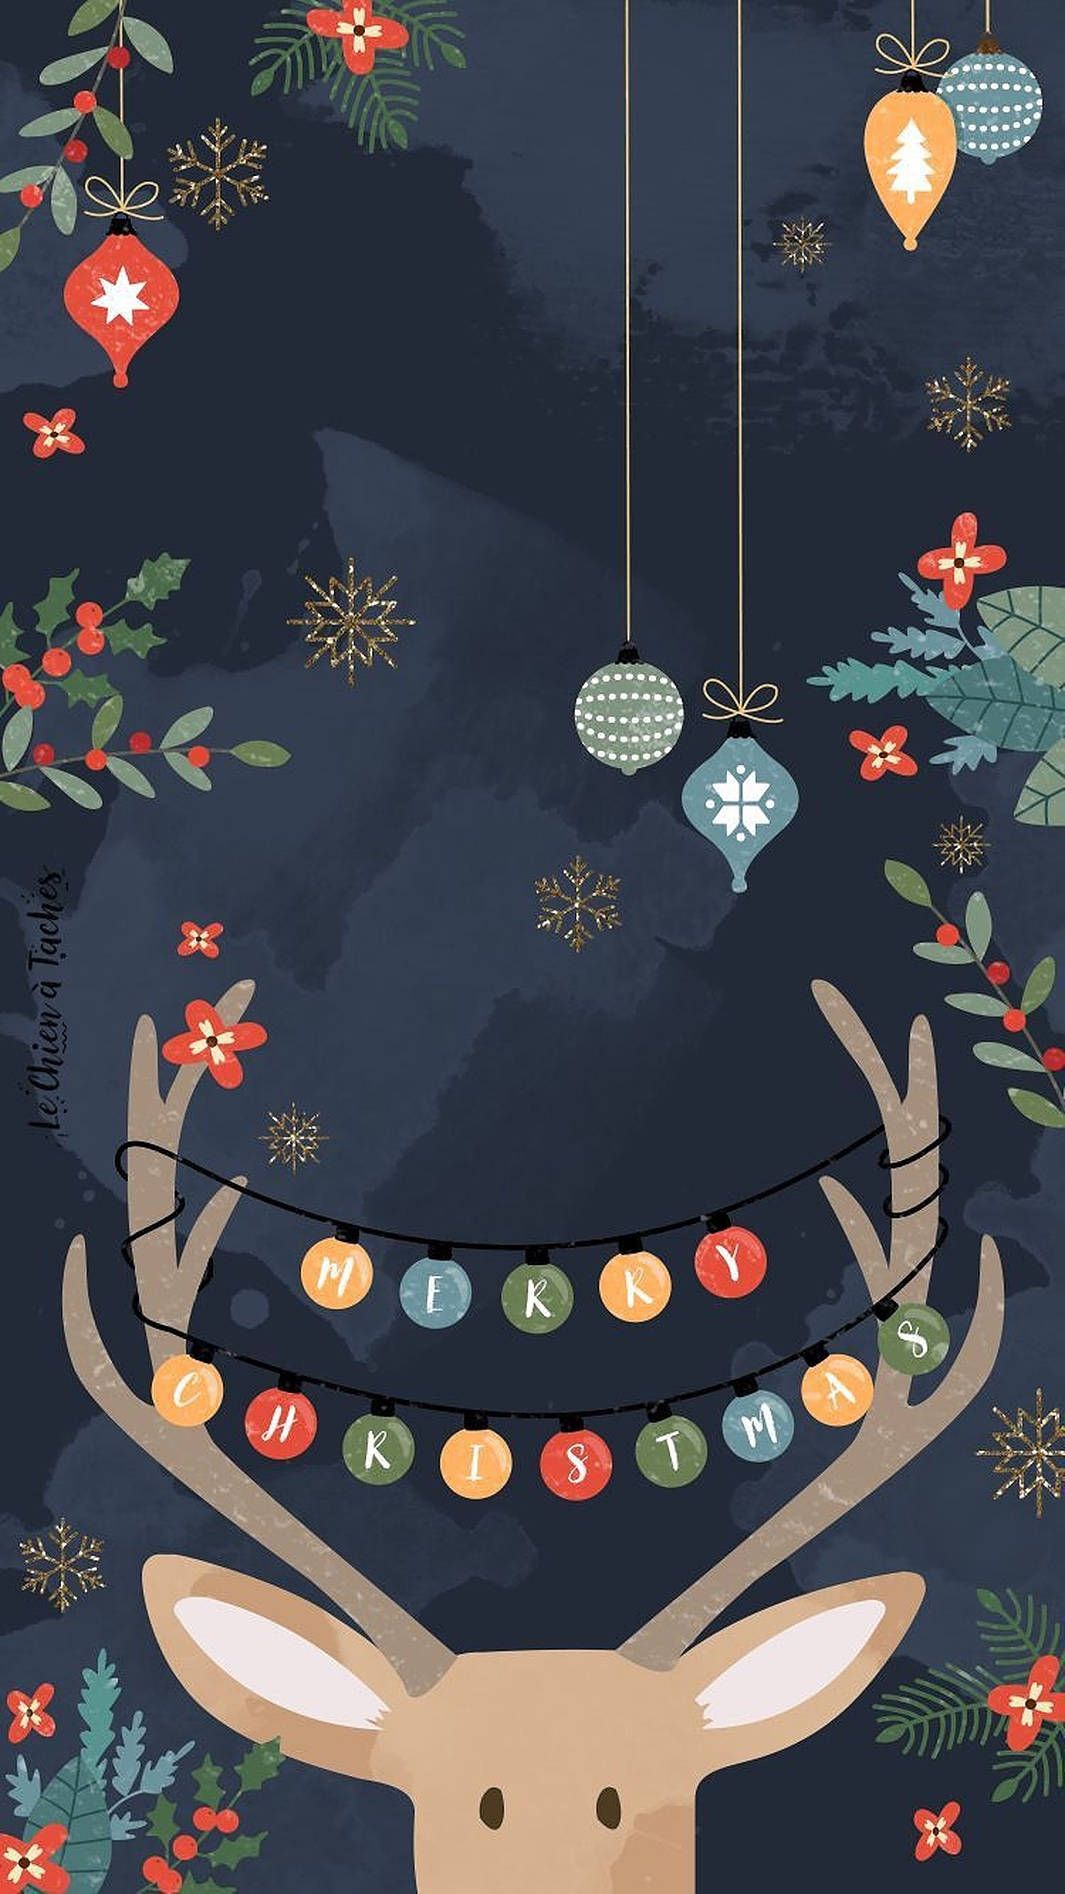 A cute Christmas wallpaper featuring a reindeer and Christmas decorations - Christmas lights